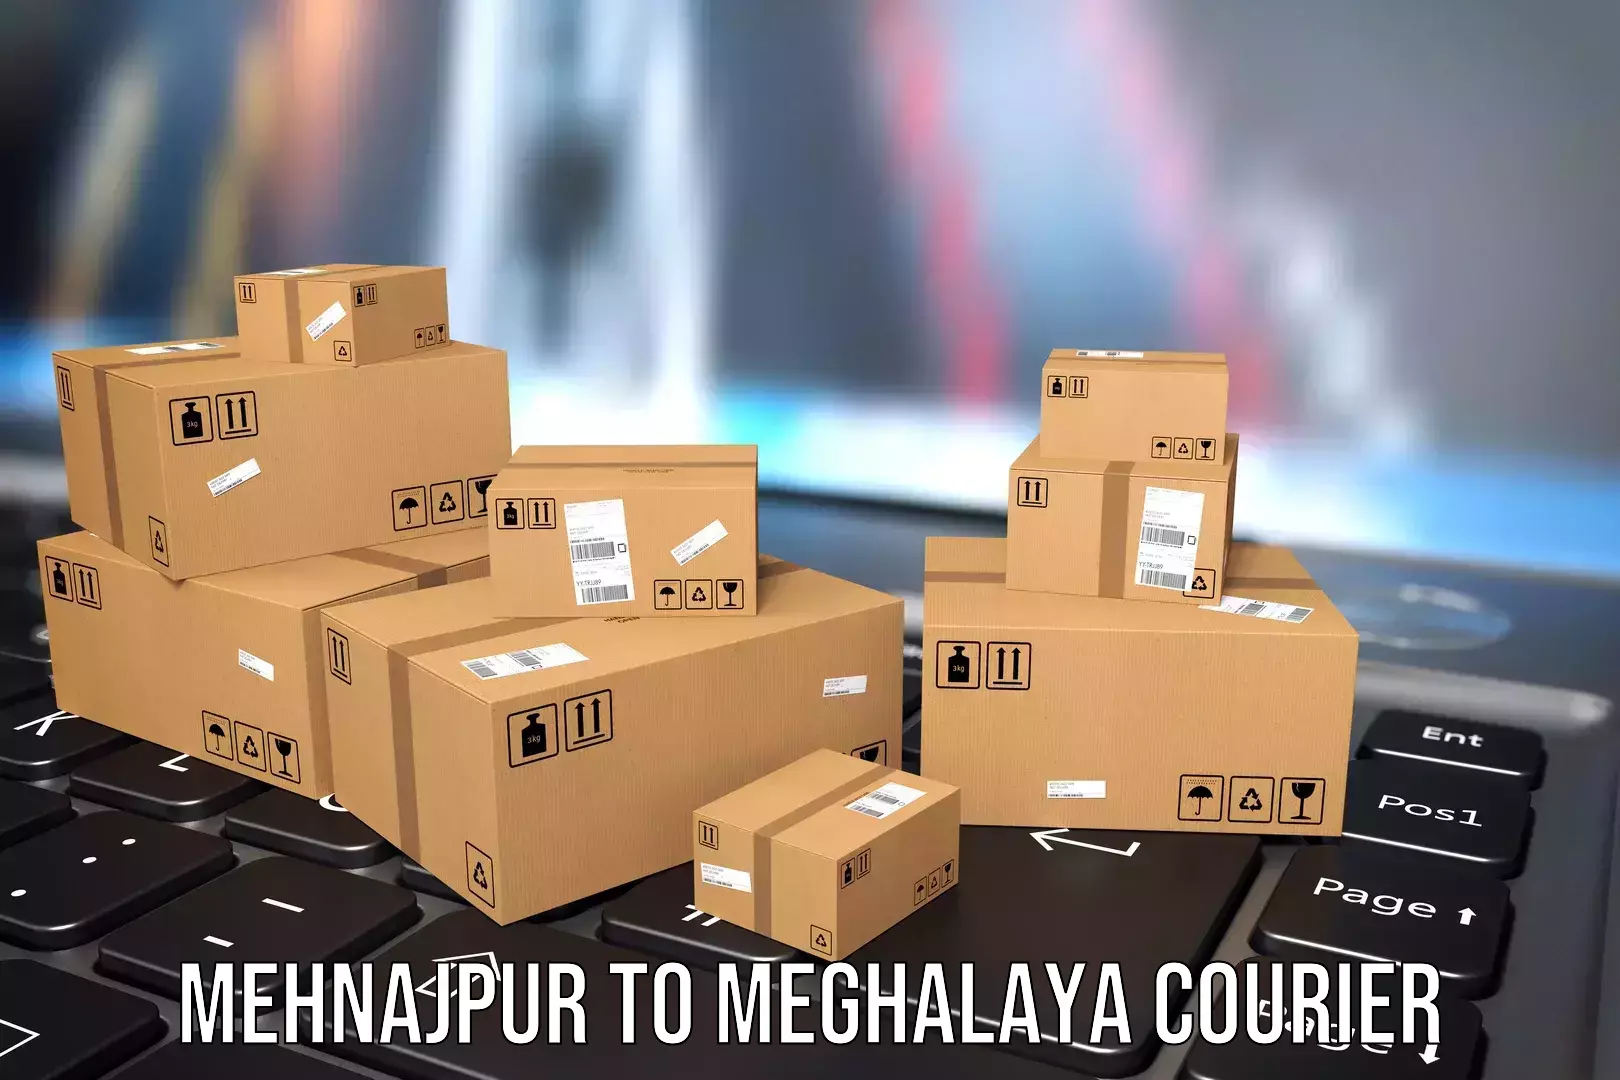 Luggage shipment specialists in Mehnajpur to Umsaw